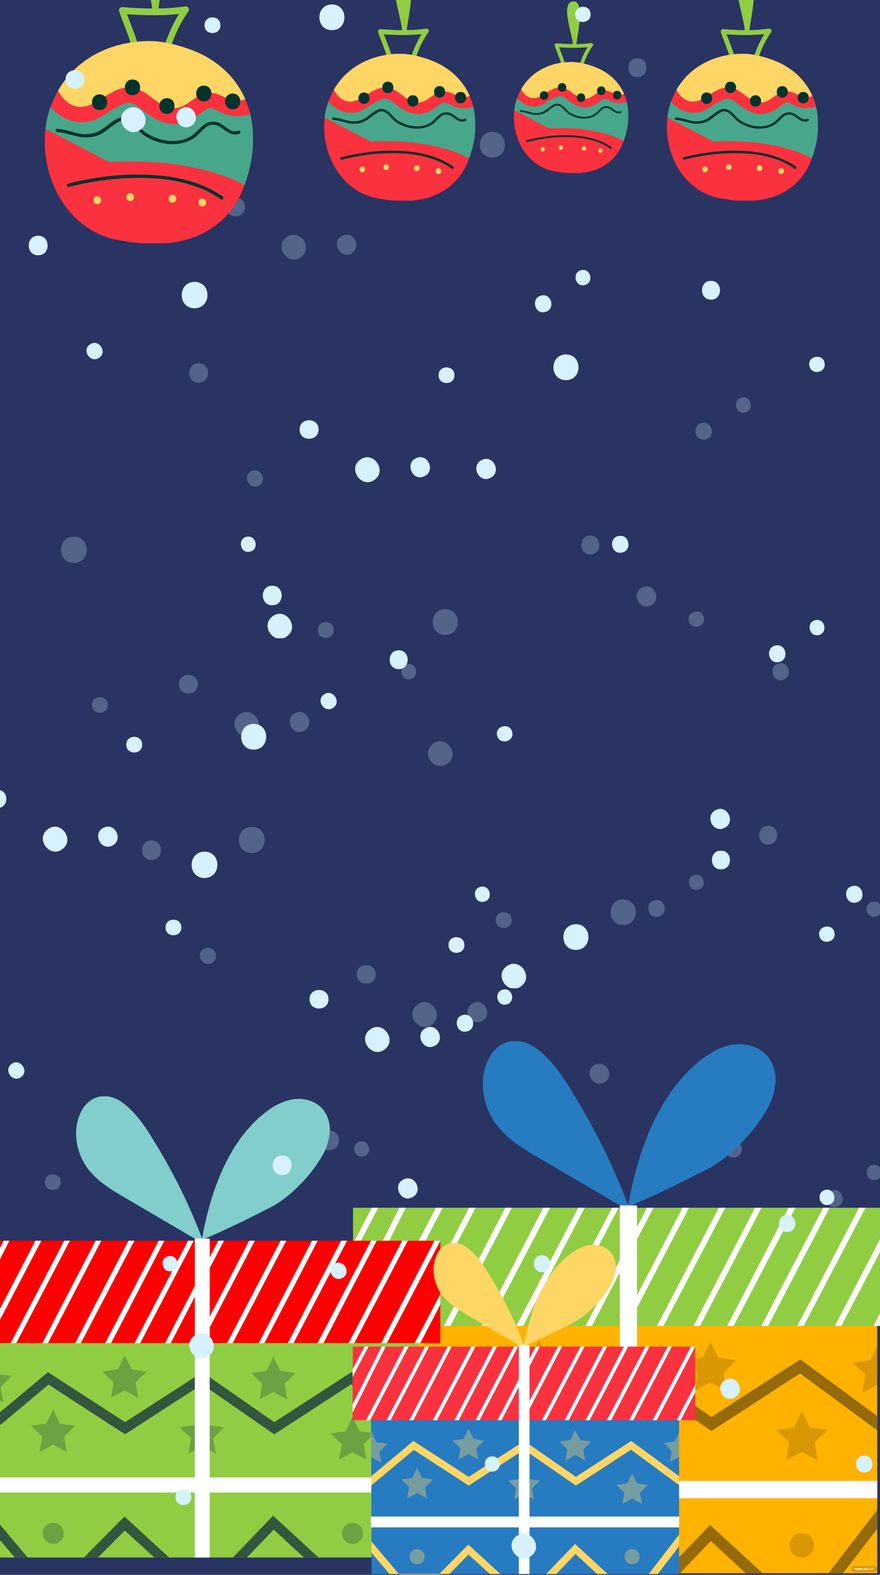 Free Boxing Day iPhone Background in PDF, Illustrator, PSD, EPS, SVG, JPG, PNG